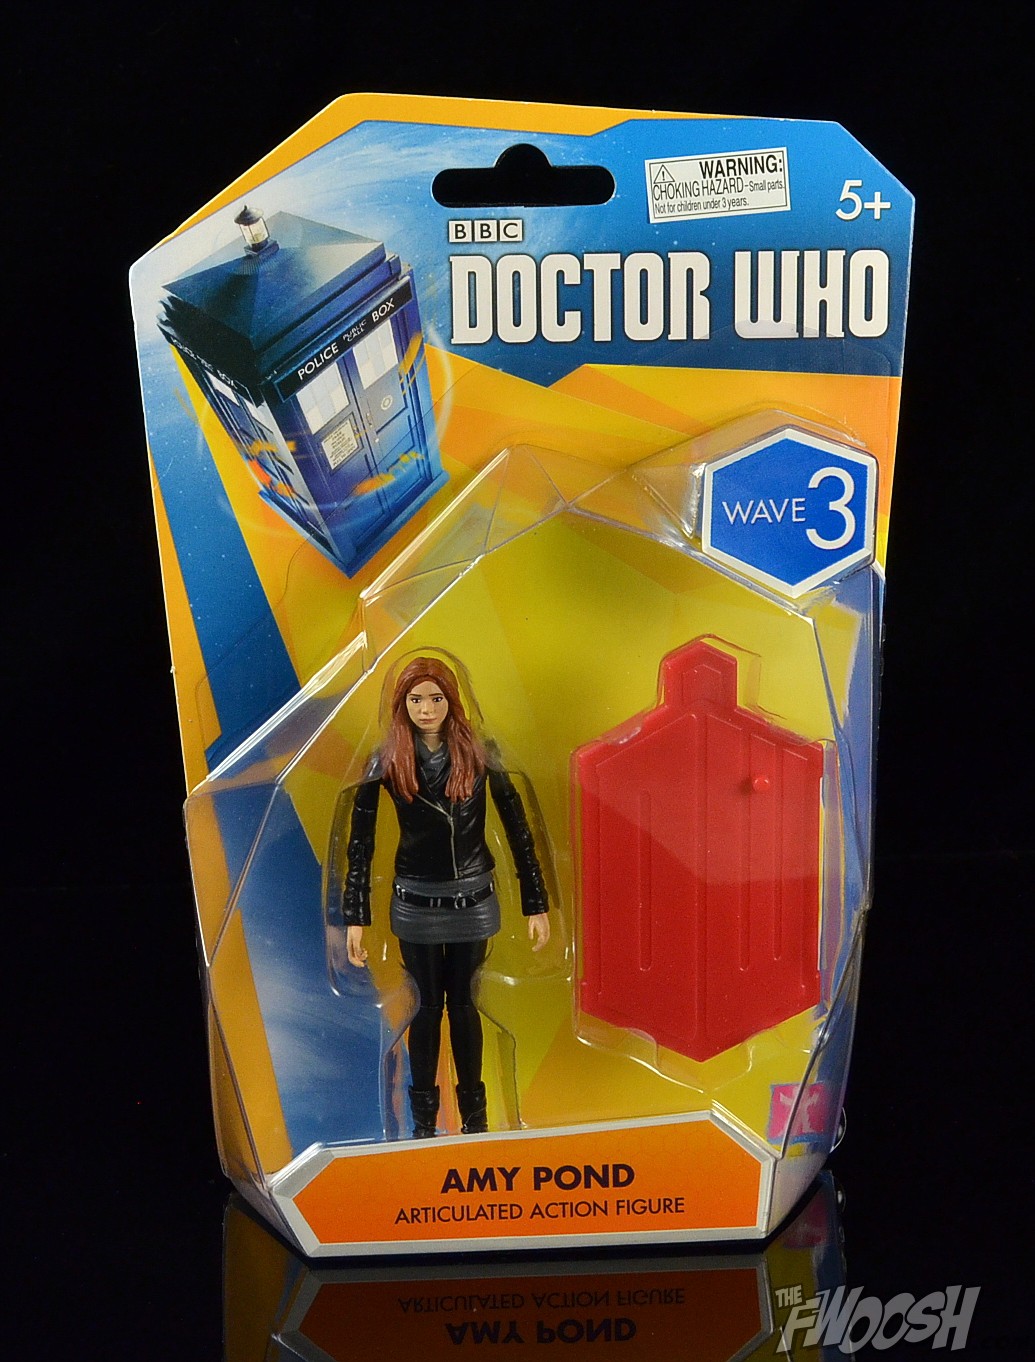 Doctor Who 2014 3.75" Figure Wave 3 # 5487 Amy Pond Mint Package Character Op 